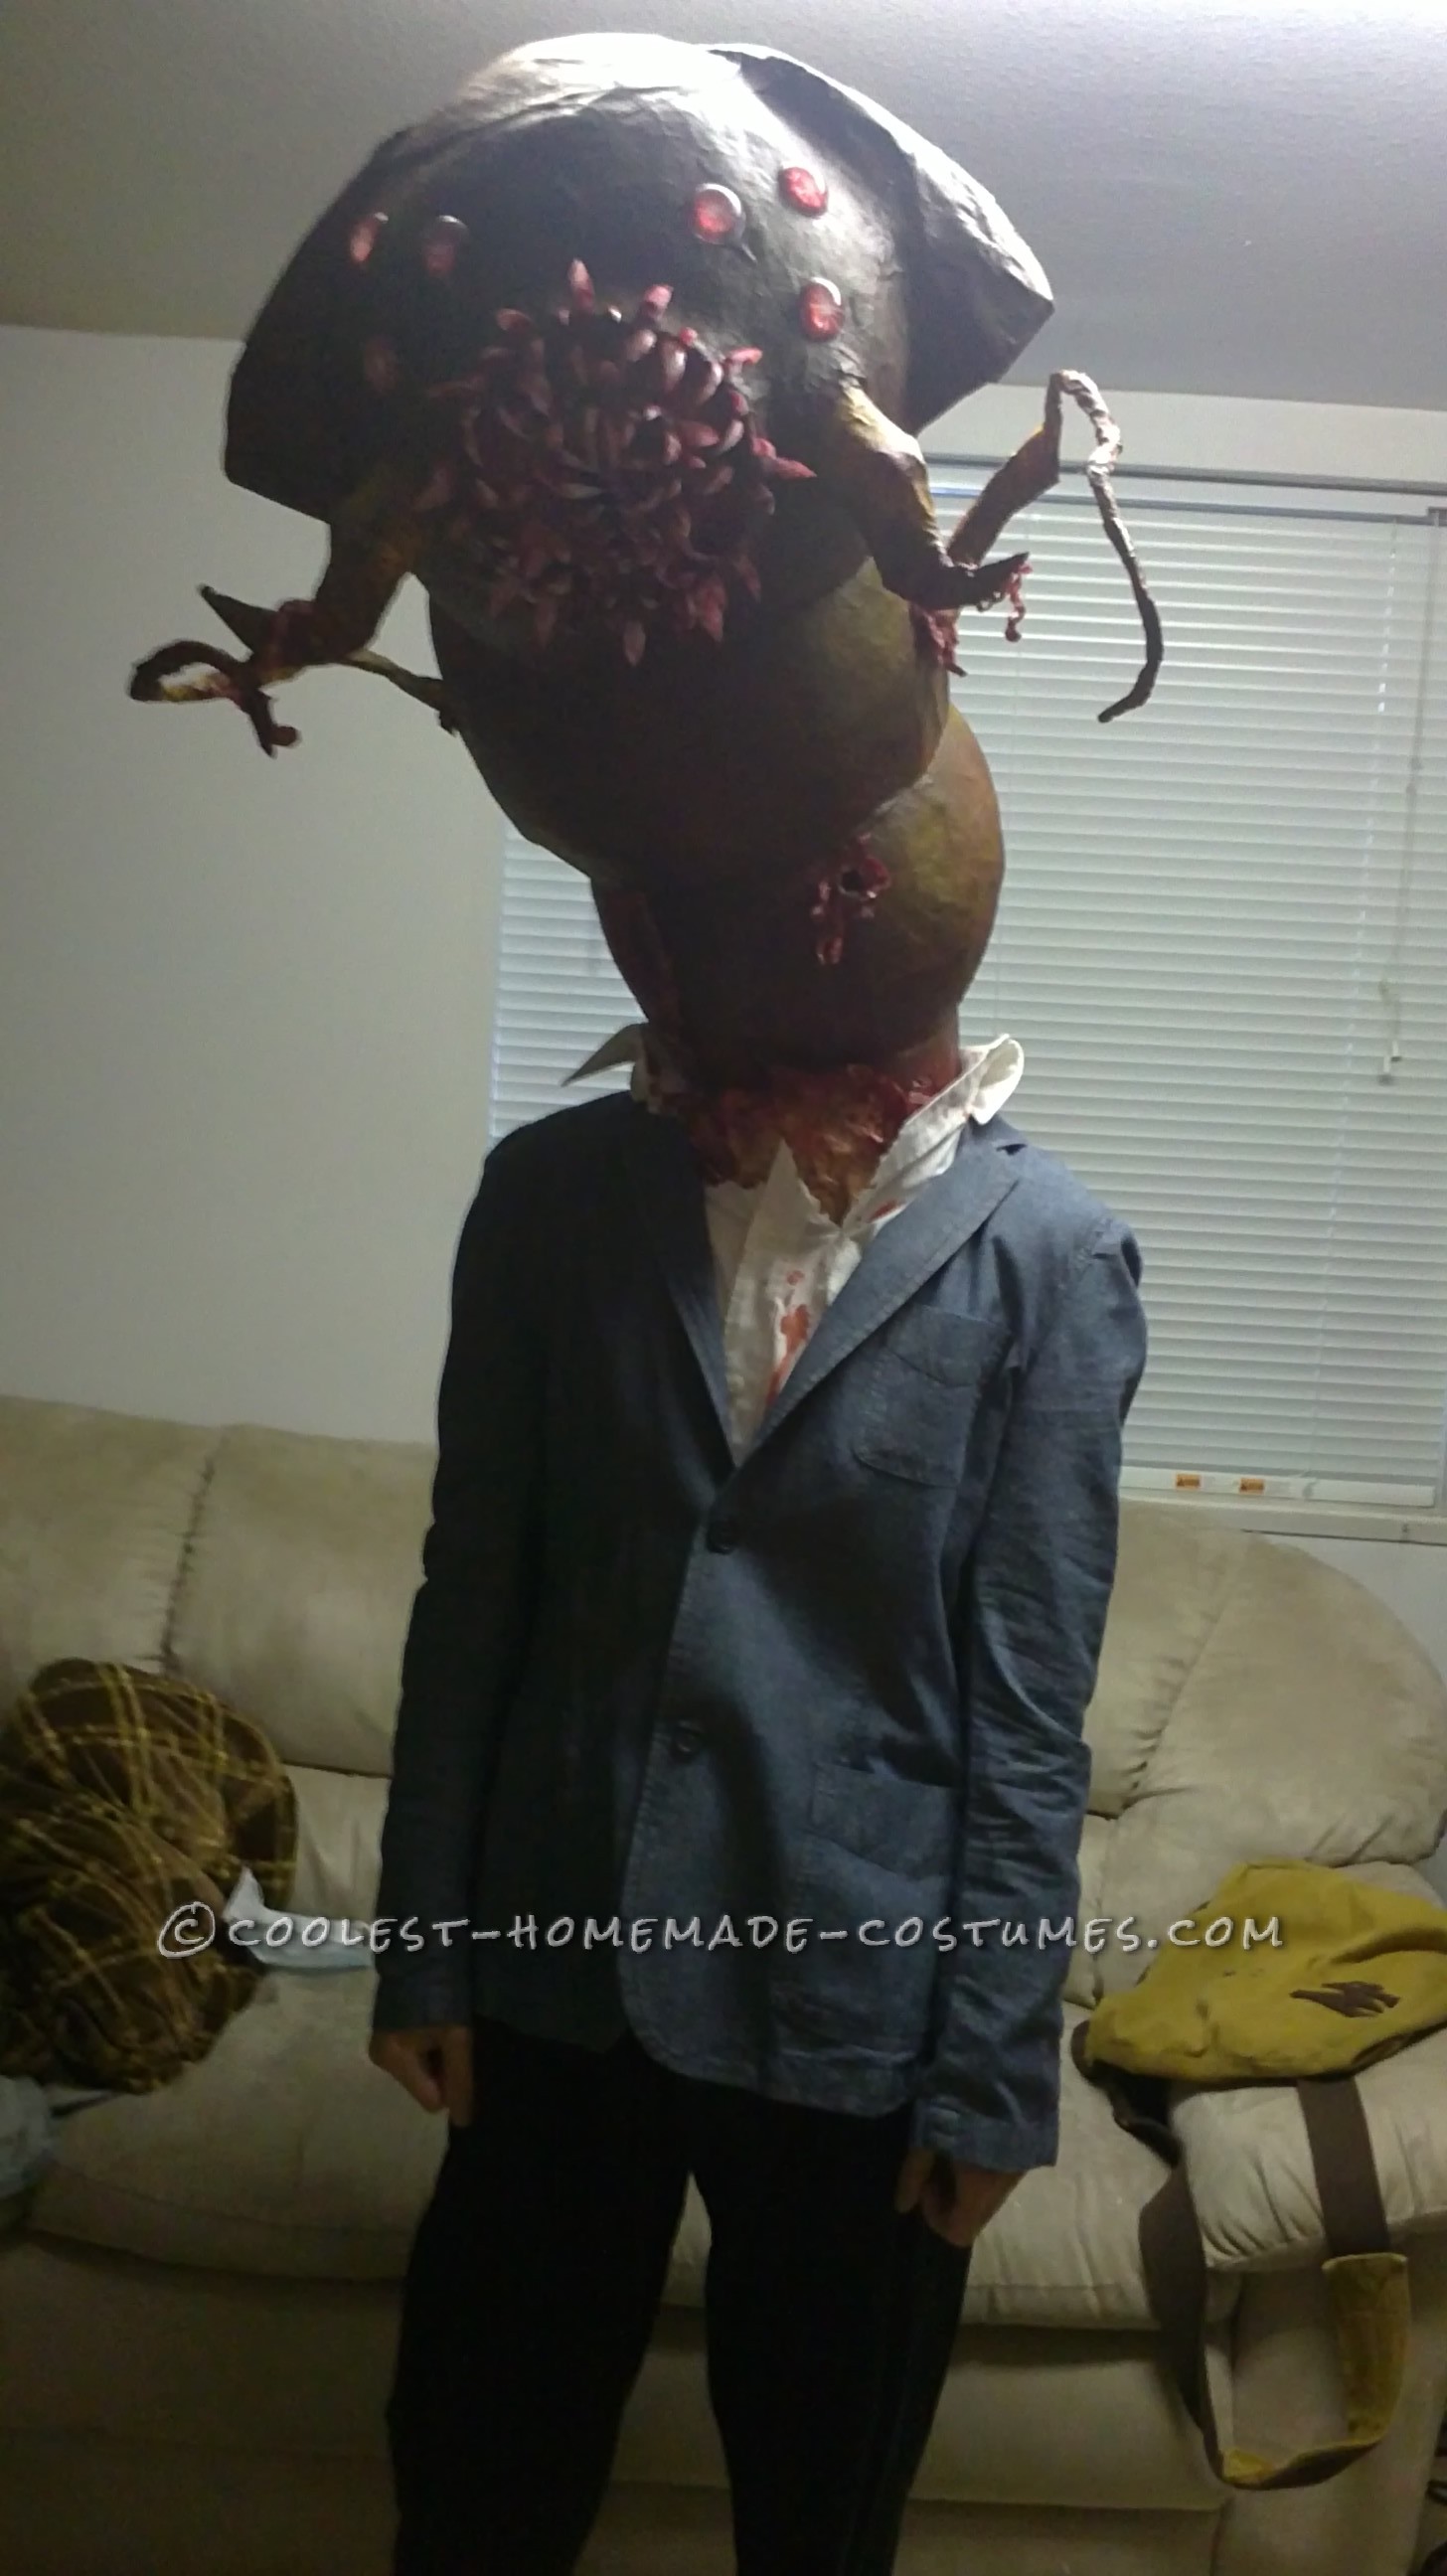 Creepy Parasitic Alien/Monster Costume Inspired by Resident Evil: Each Halloween I strive to create a costume that is unique or seldom if ever seen before. After seeing watching the movie Prometheus, the idea for an